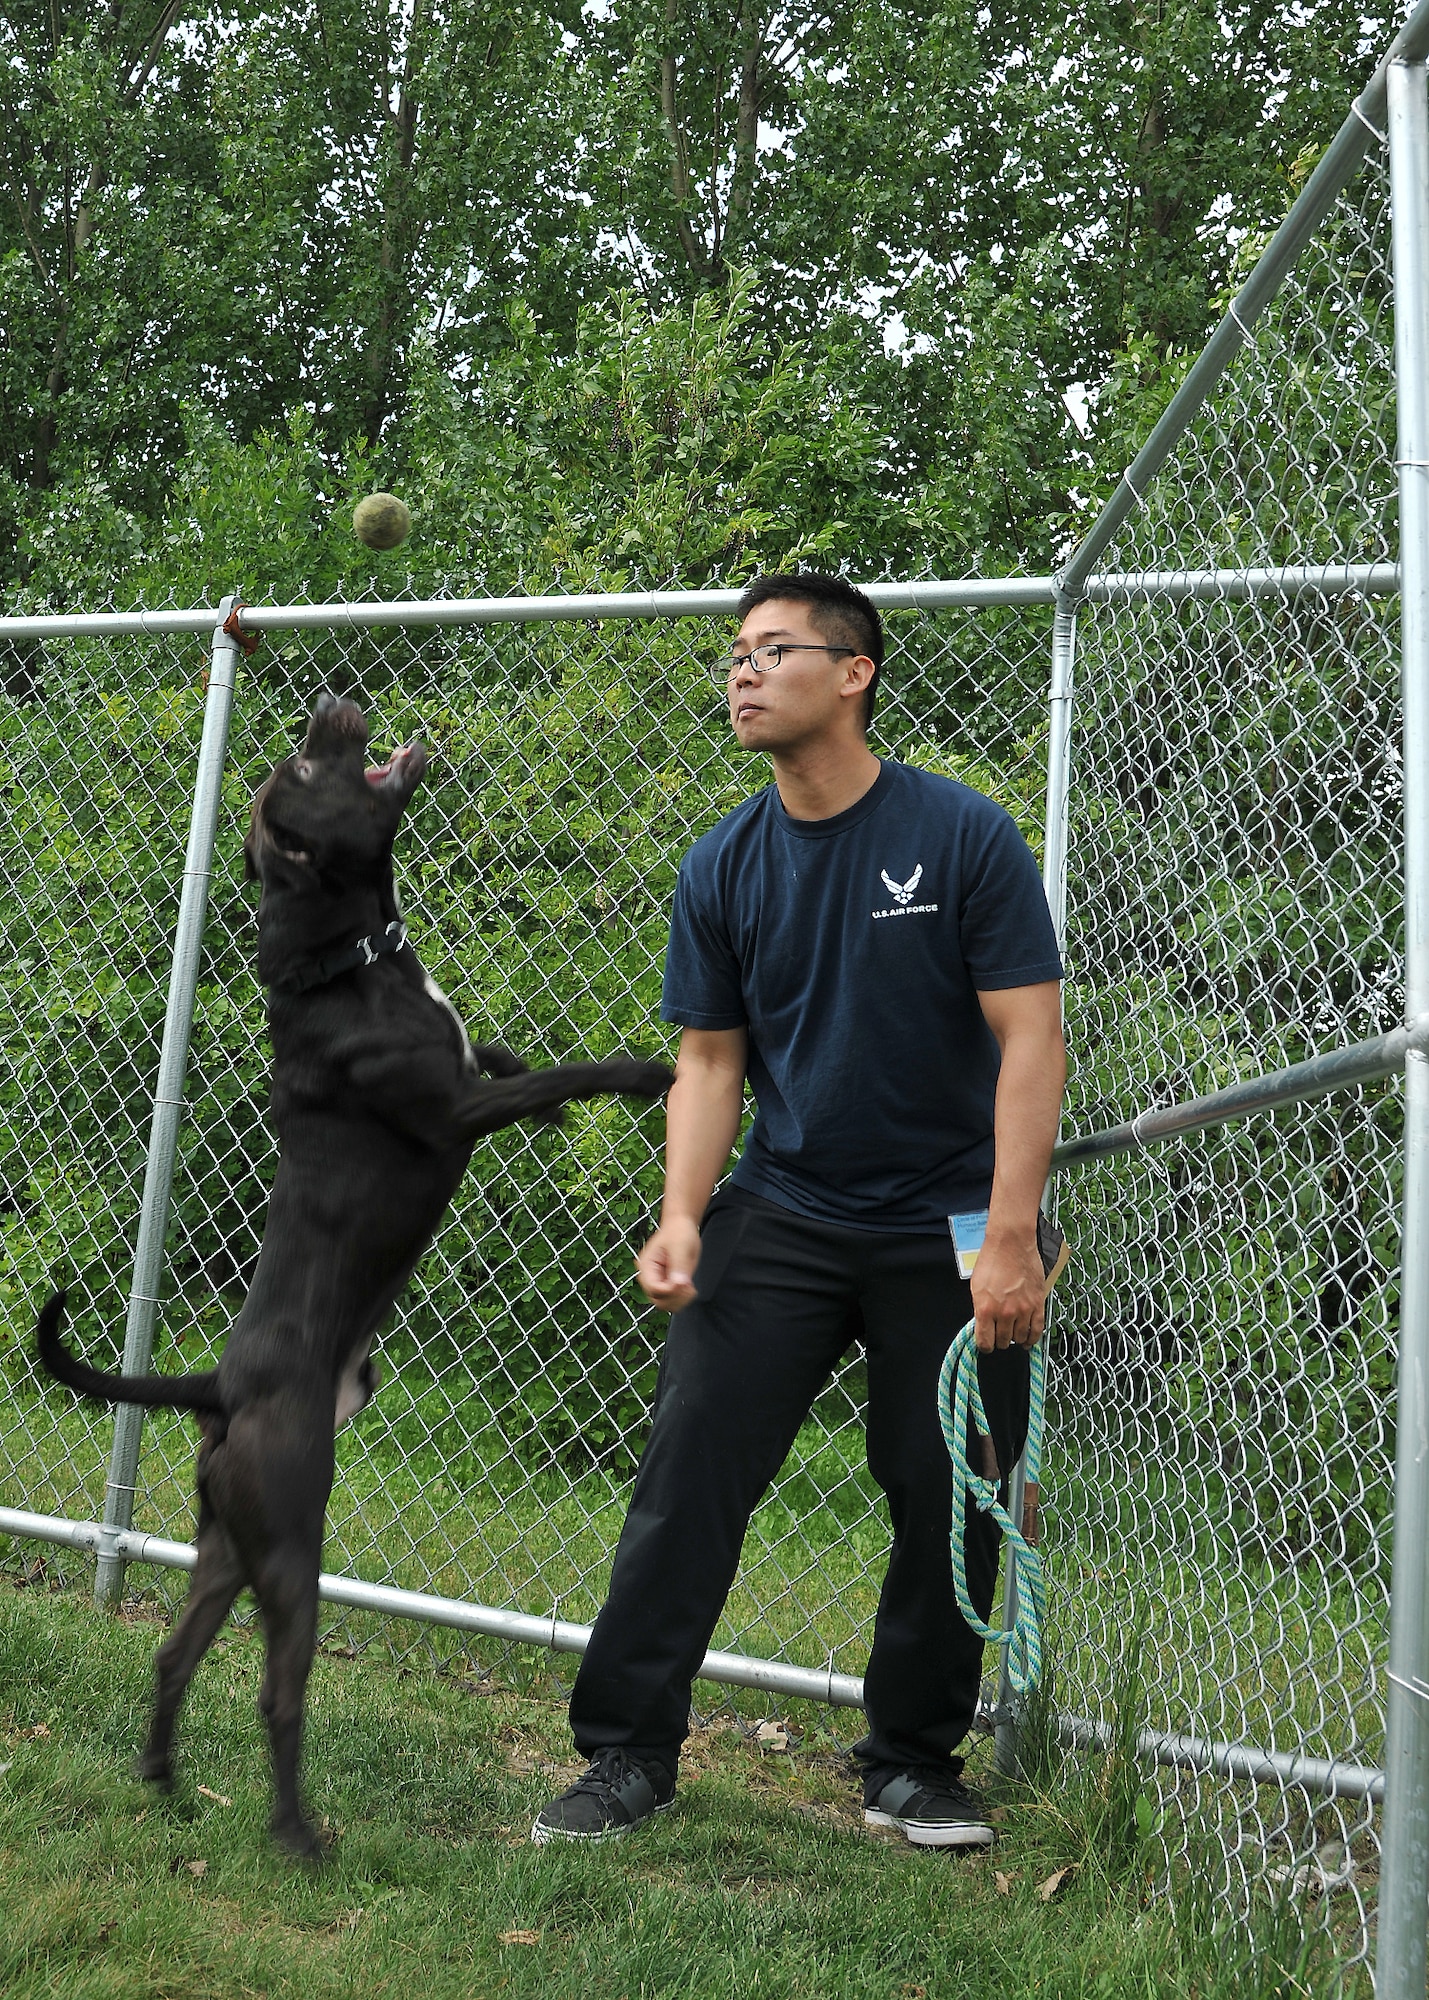 Airman 1st Class Namhoon Kim, 319th Logistics Readiness Squadron customer support apprentice, plays catch with Pharrell, a pit bull terrier, at the Circle of Friends Humane Society Aug. 9, 2014, in Grand Forks, N.D. The local animal shelter has between 30 and 40 dogs, but also takes in cats, rodents and reptiles. (U.S. Air Force photo/Senior Airman Xavier Navarro)